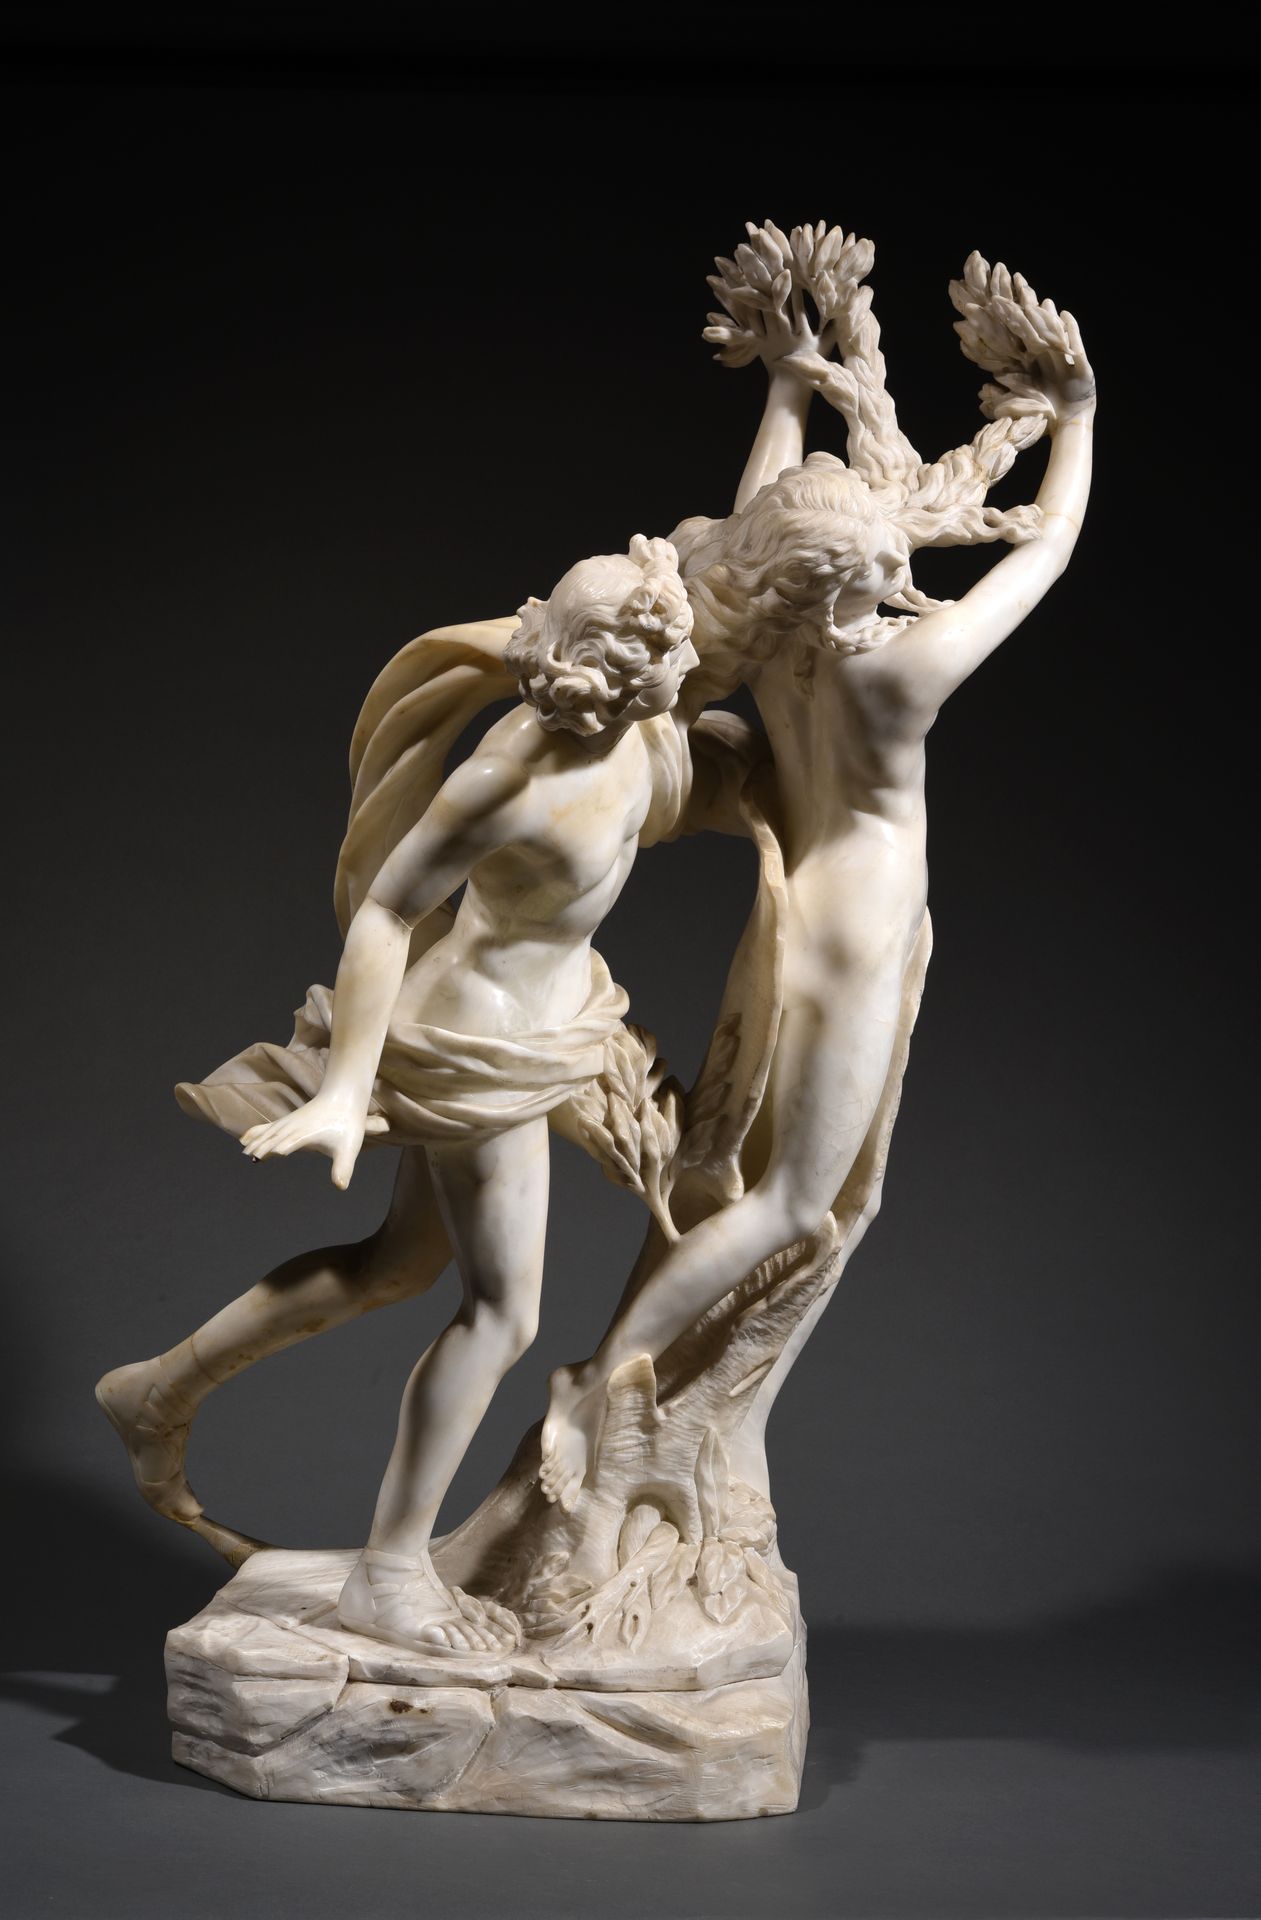 Null APOLLO AND DAPHNE

Sculpture in white marble

19th century period

H: 93 cm&hellip;